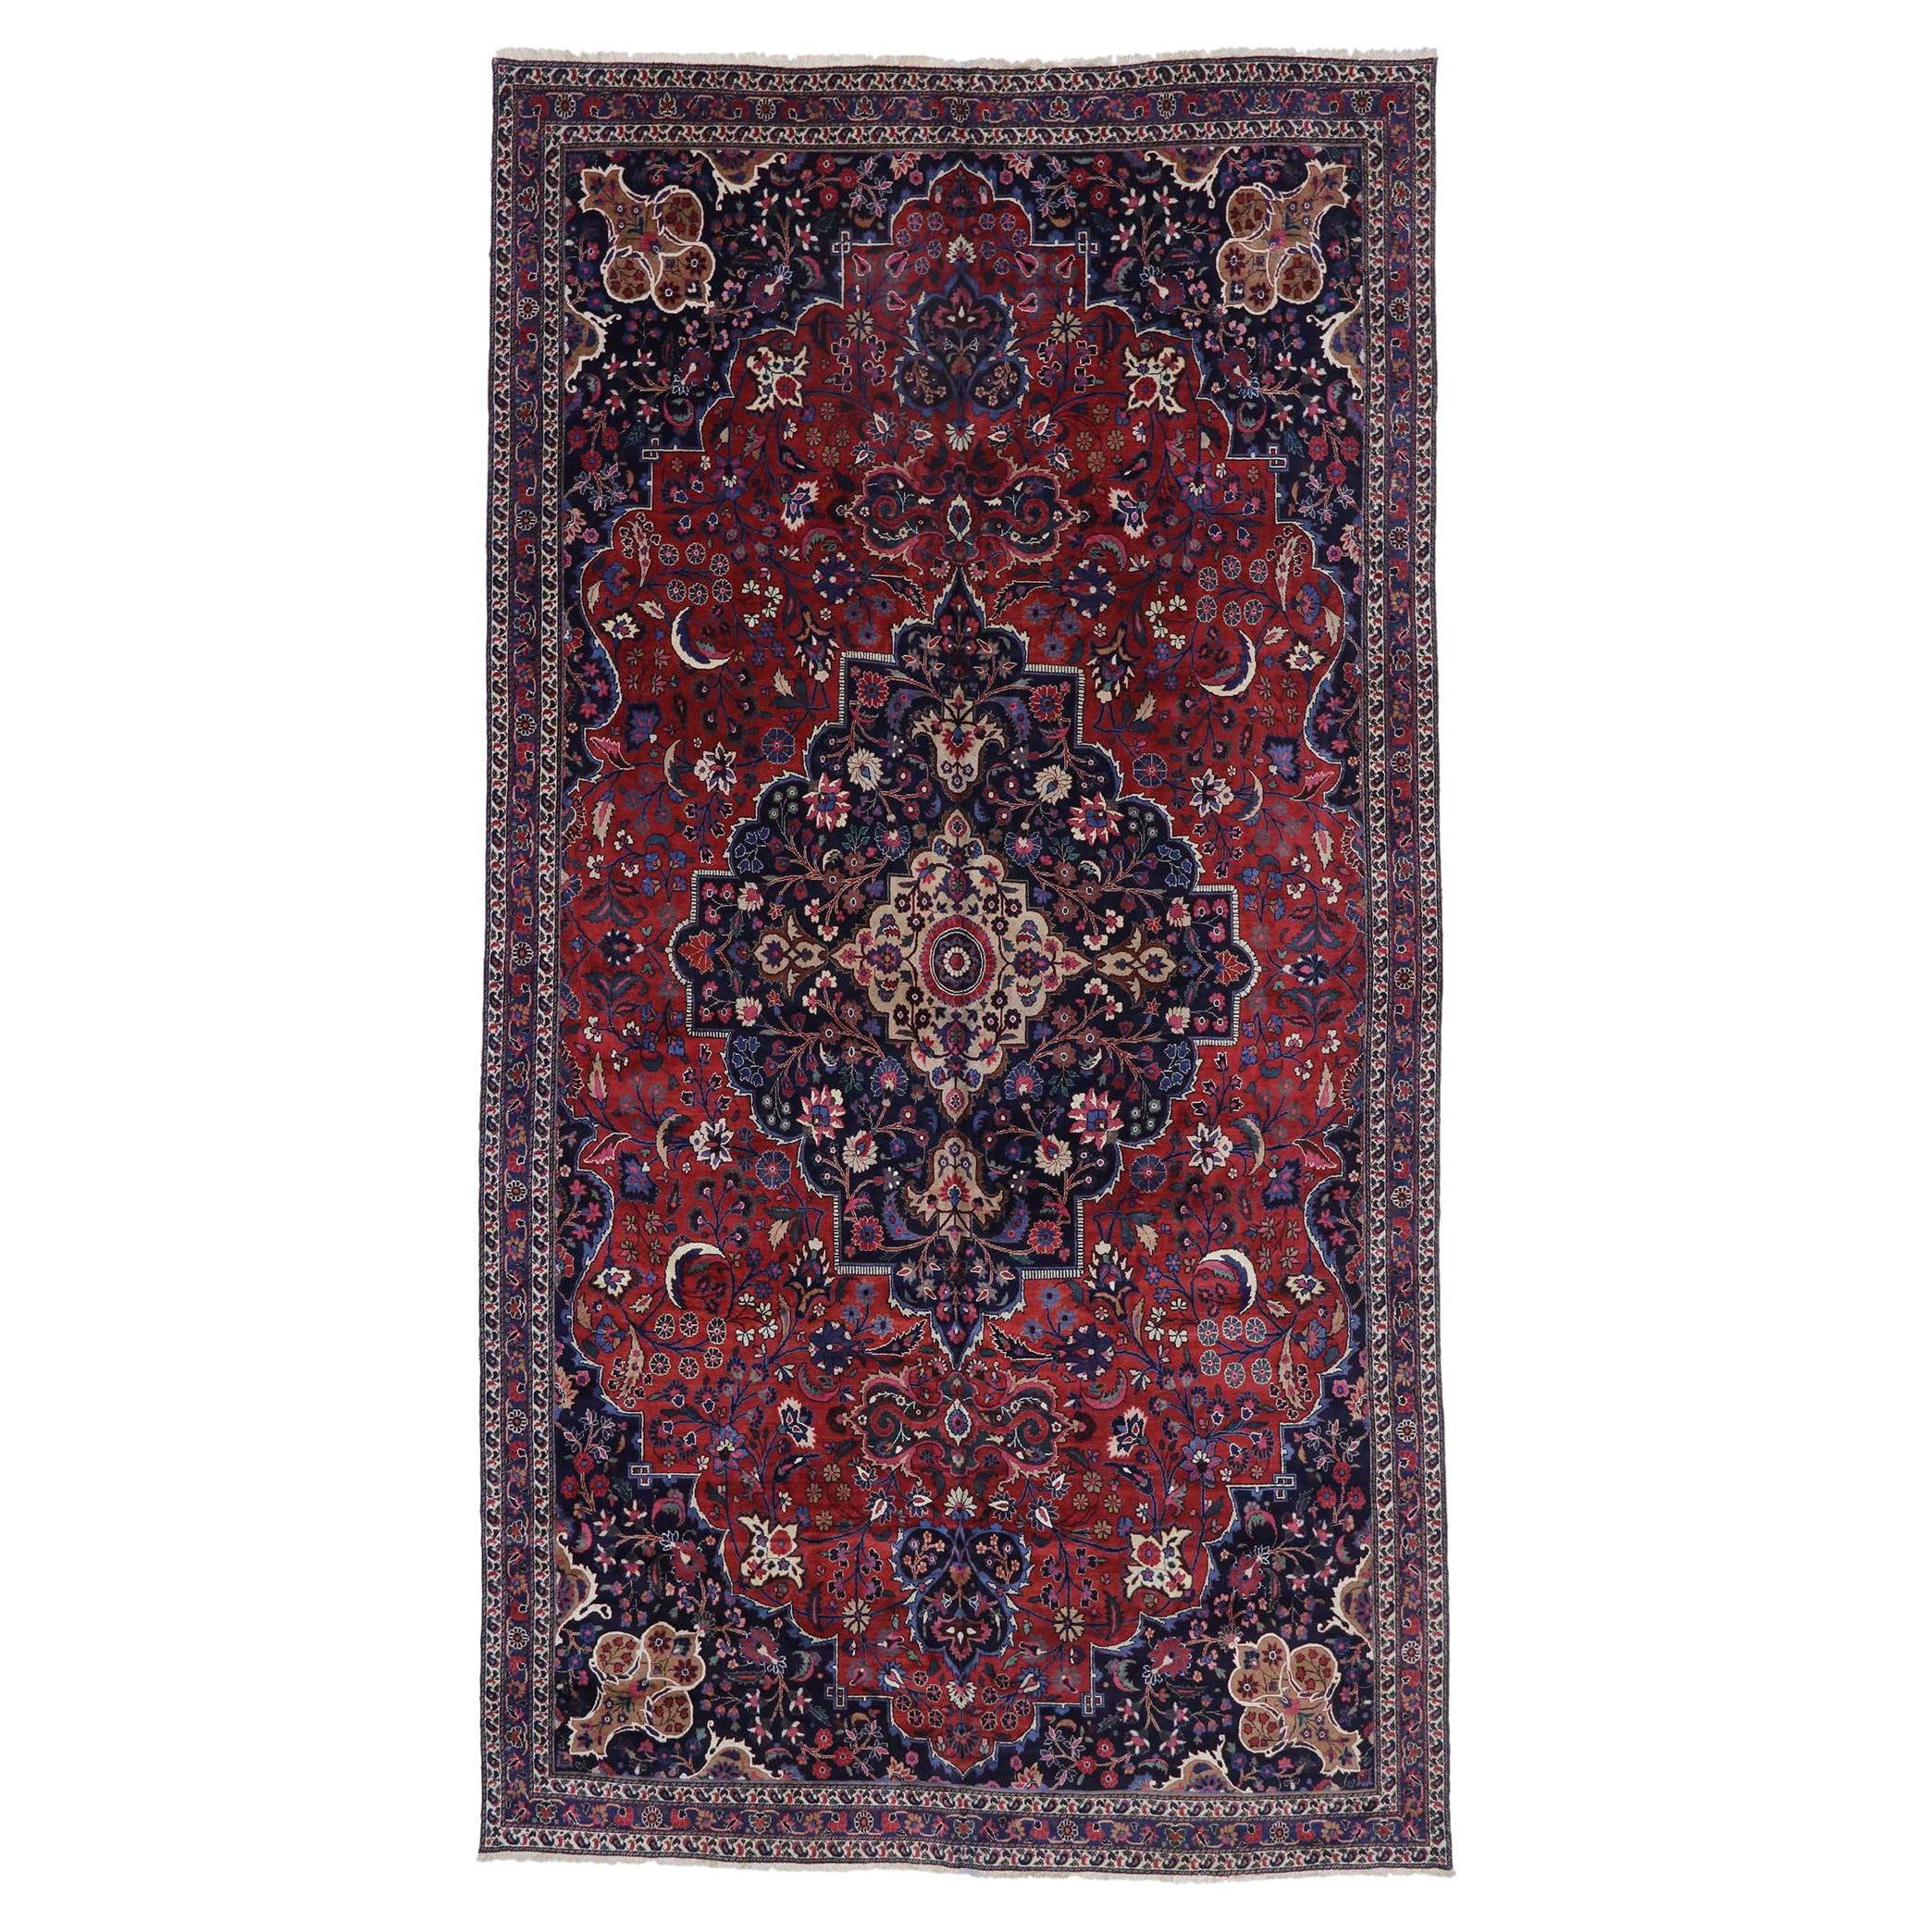 Antique Persian Mashhad Rug with Baroque Victorian Style